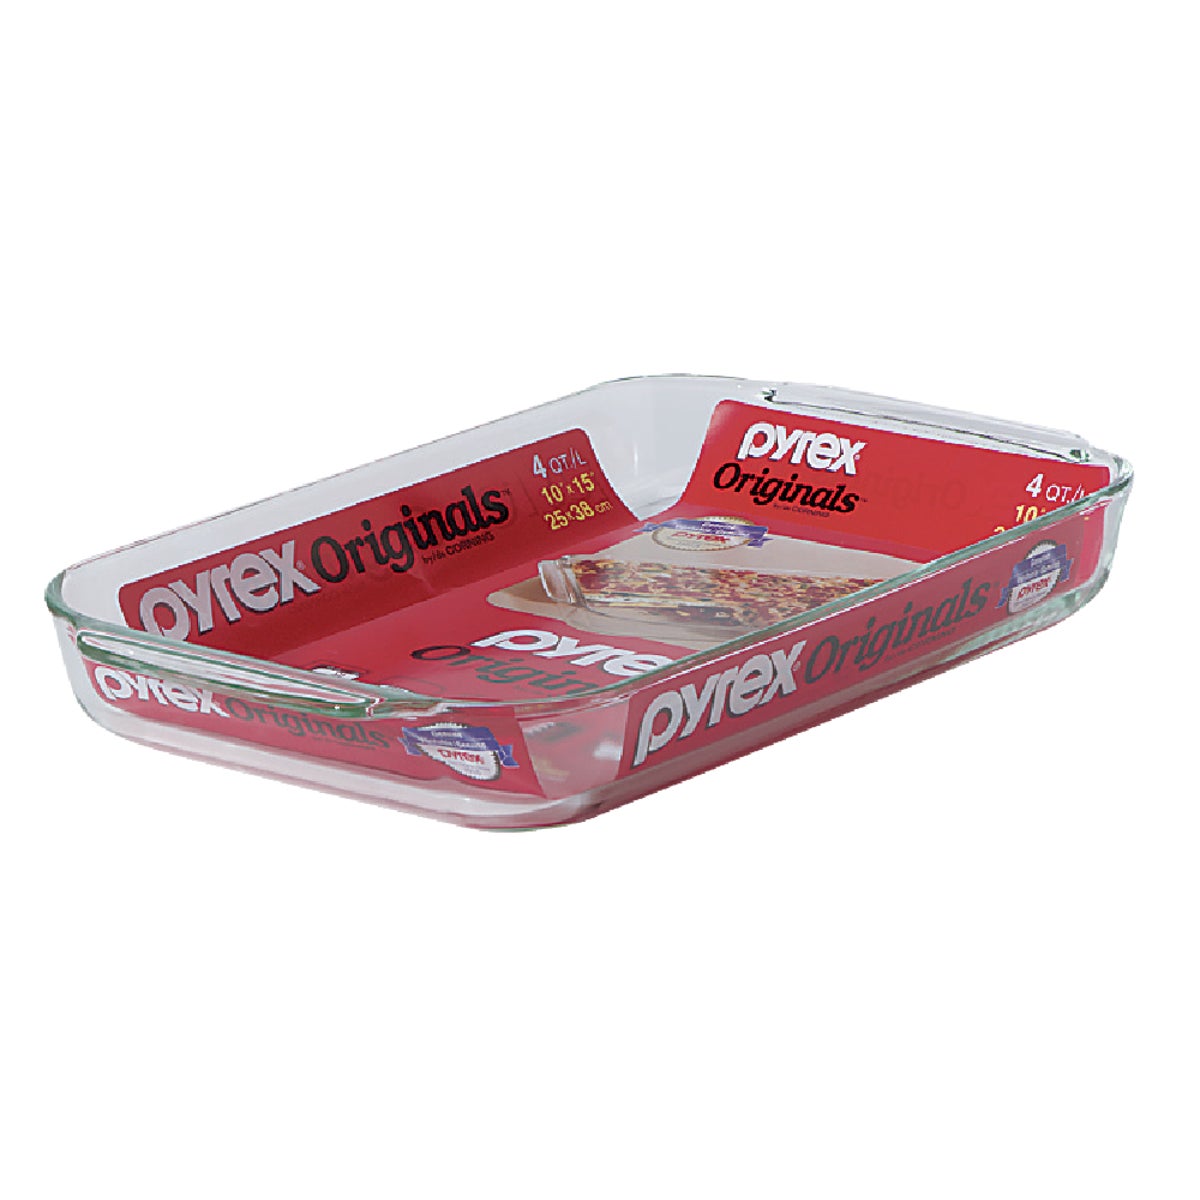 Item 657818, Pyrex bakeware is durable, transparent for easy monitoring of baking 